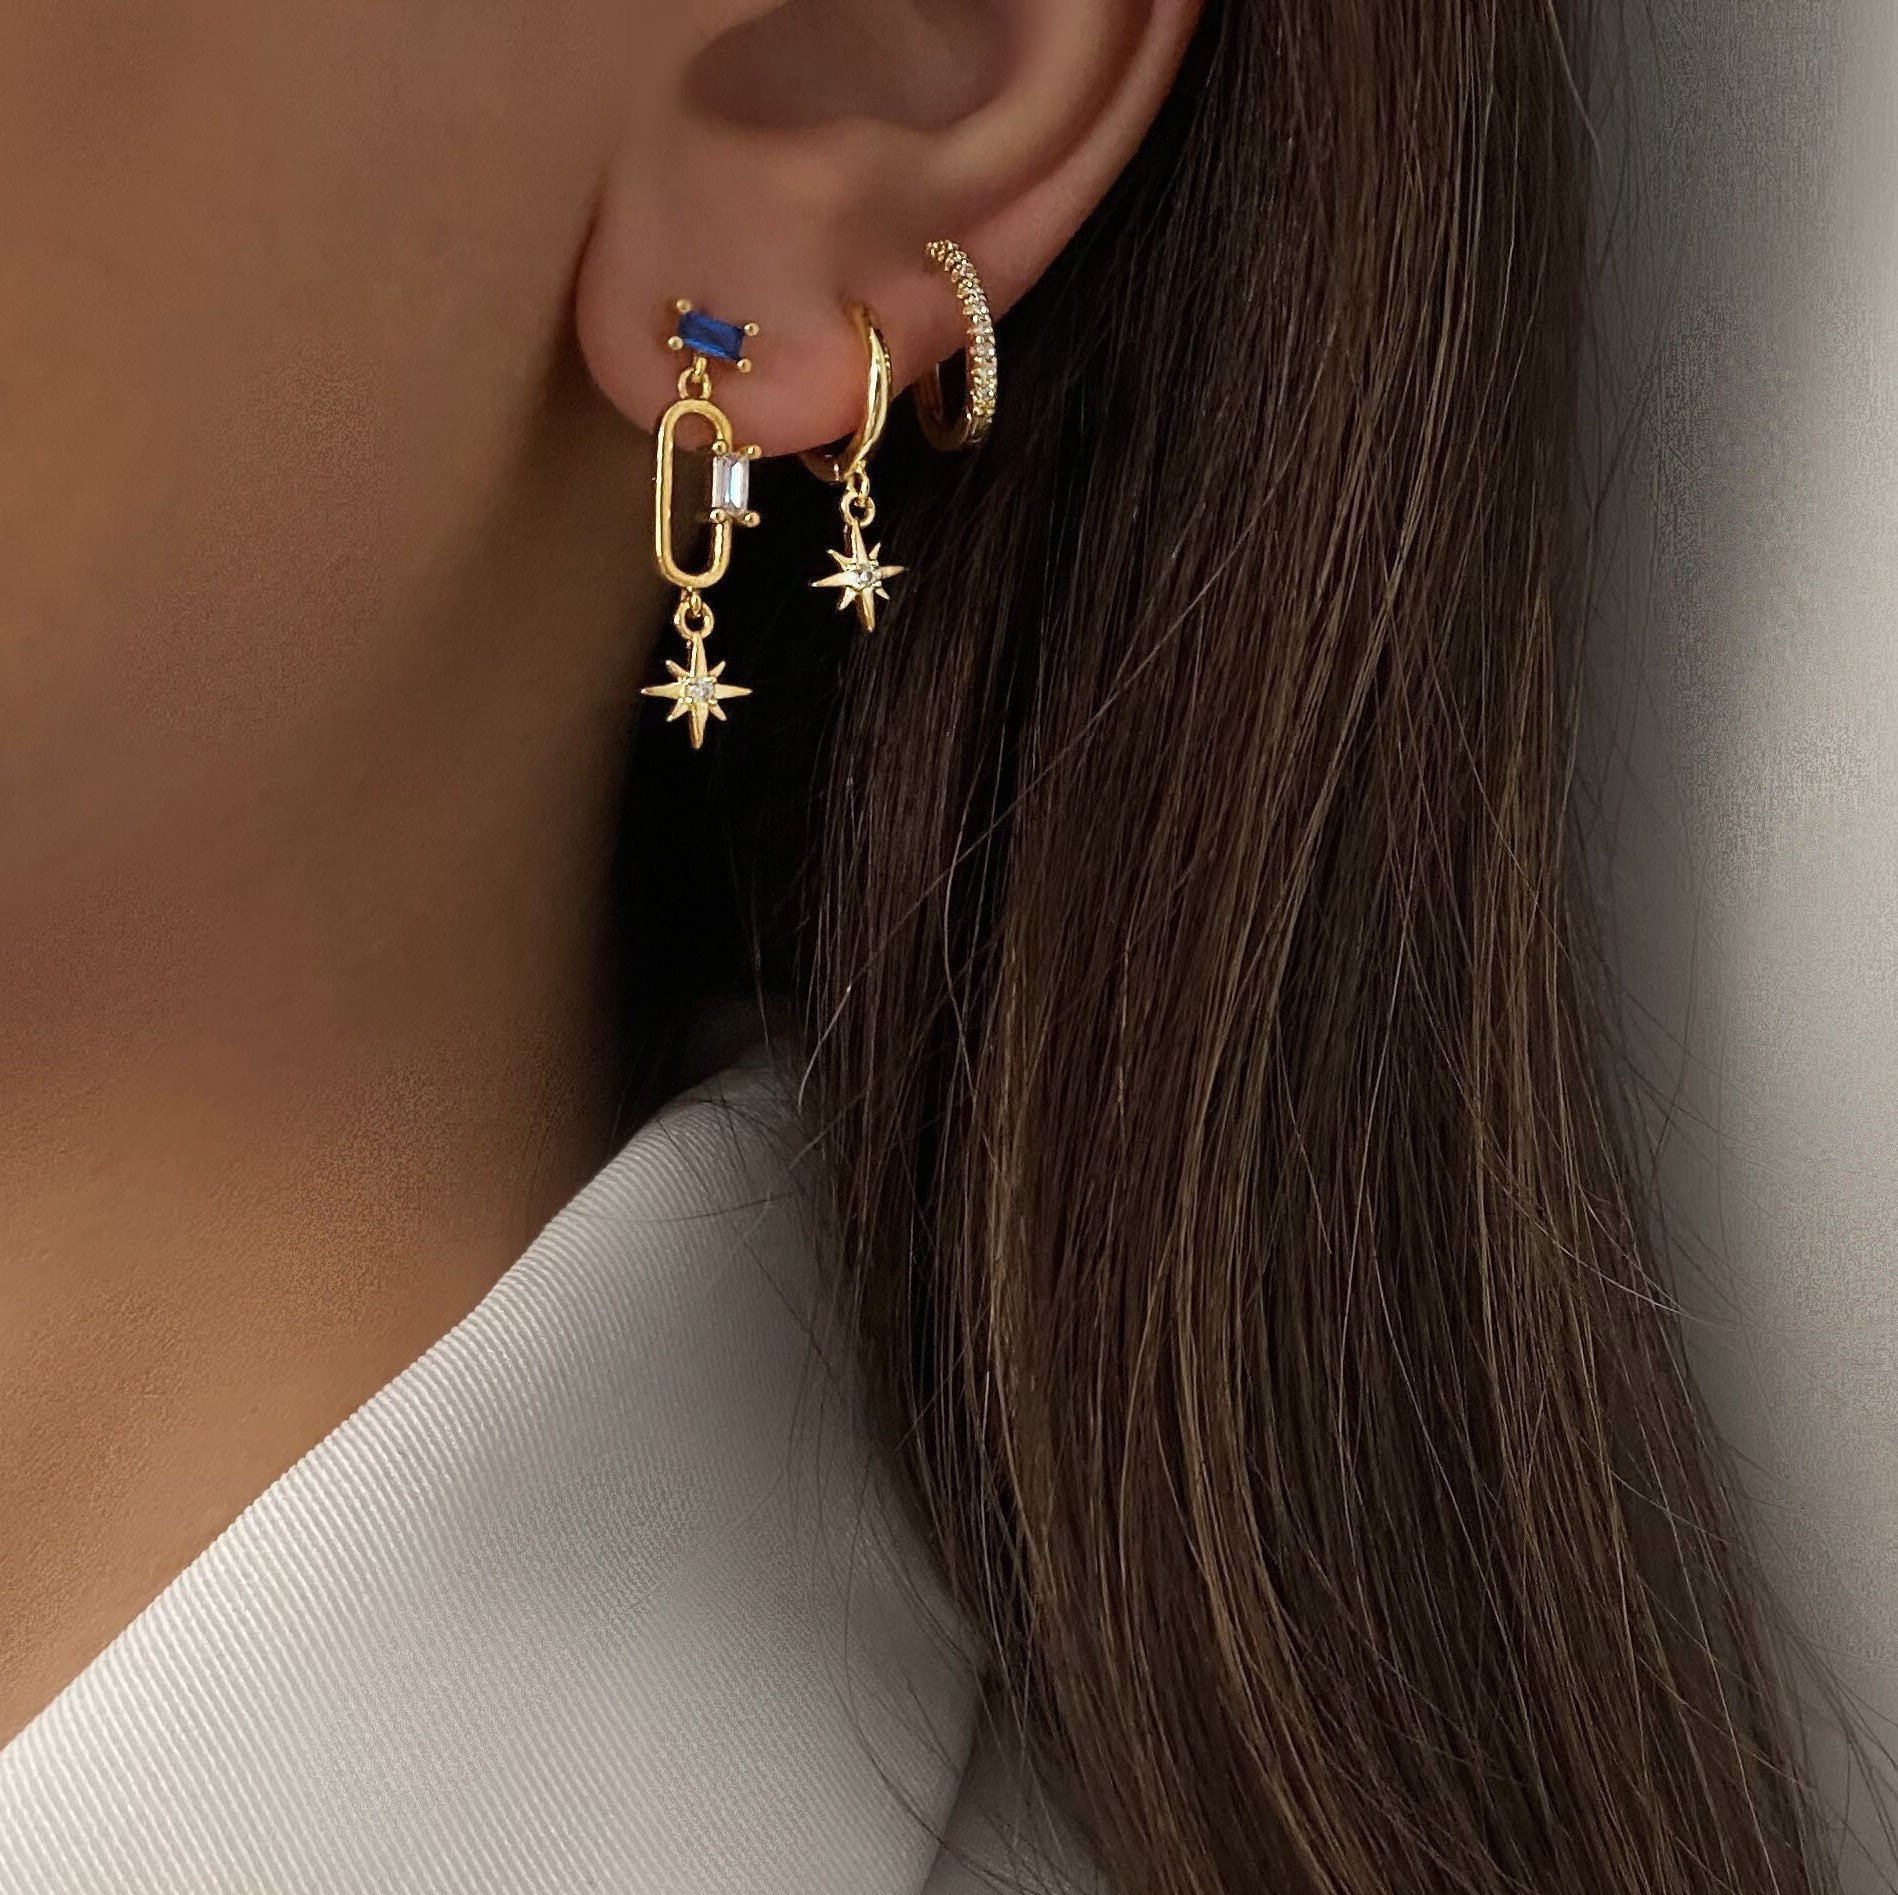 Celestial - Mismatched Moon and Star Drop Earring Set